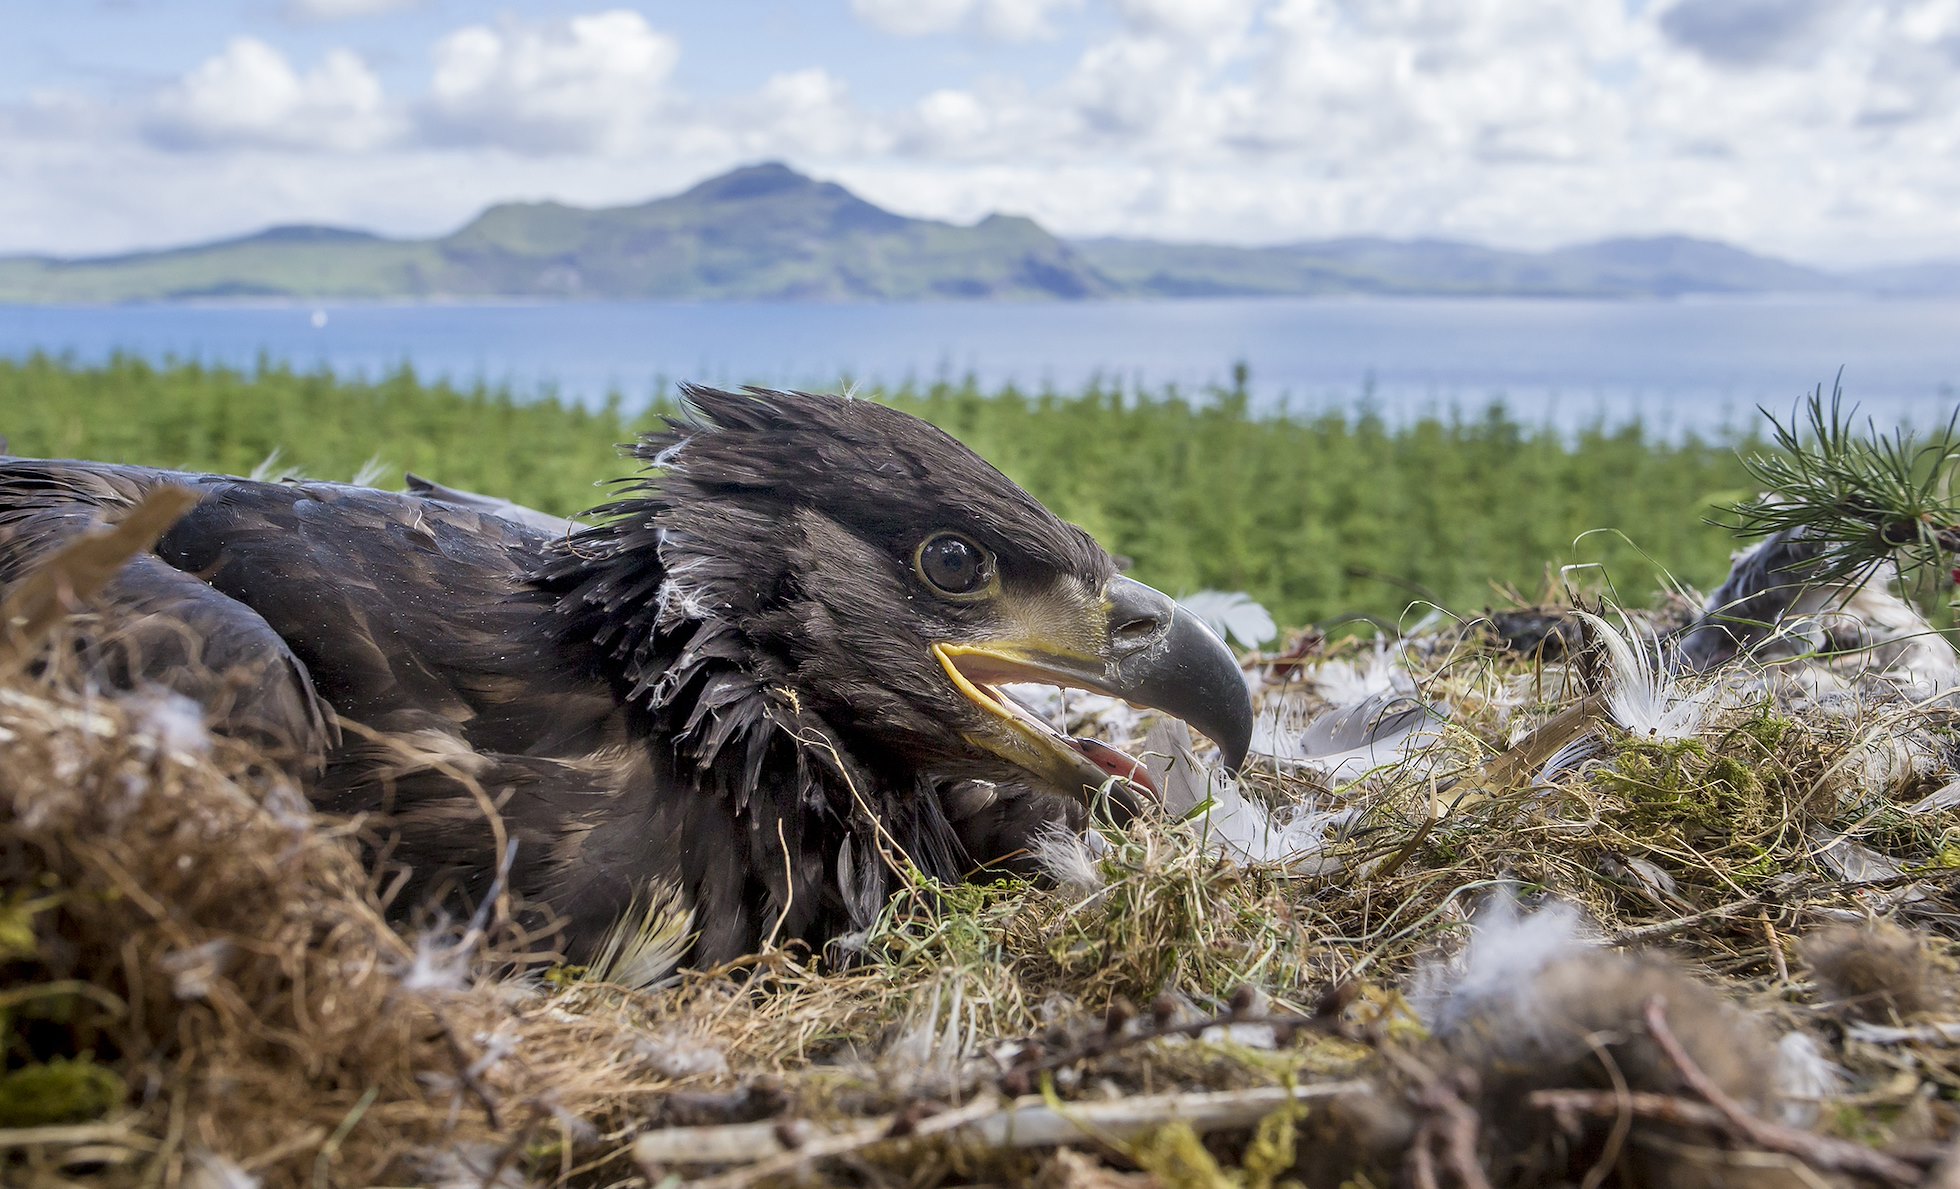 White Tailed Eagle (Haliaeetus albicilla) chick in nest in large conifer tree with forest,  mountain and coastal habitat in background